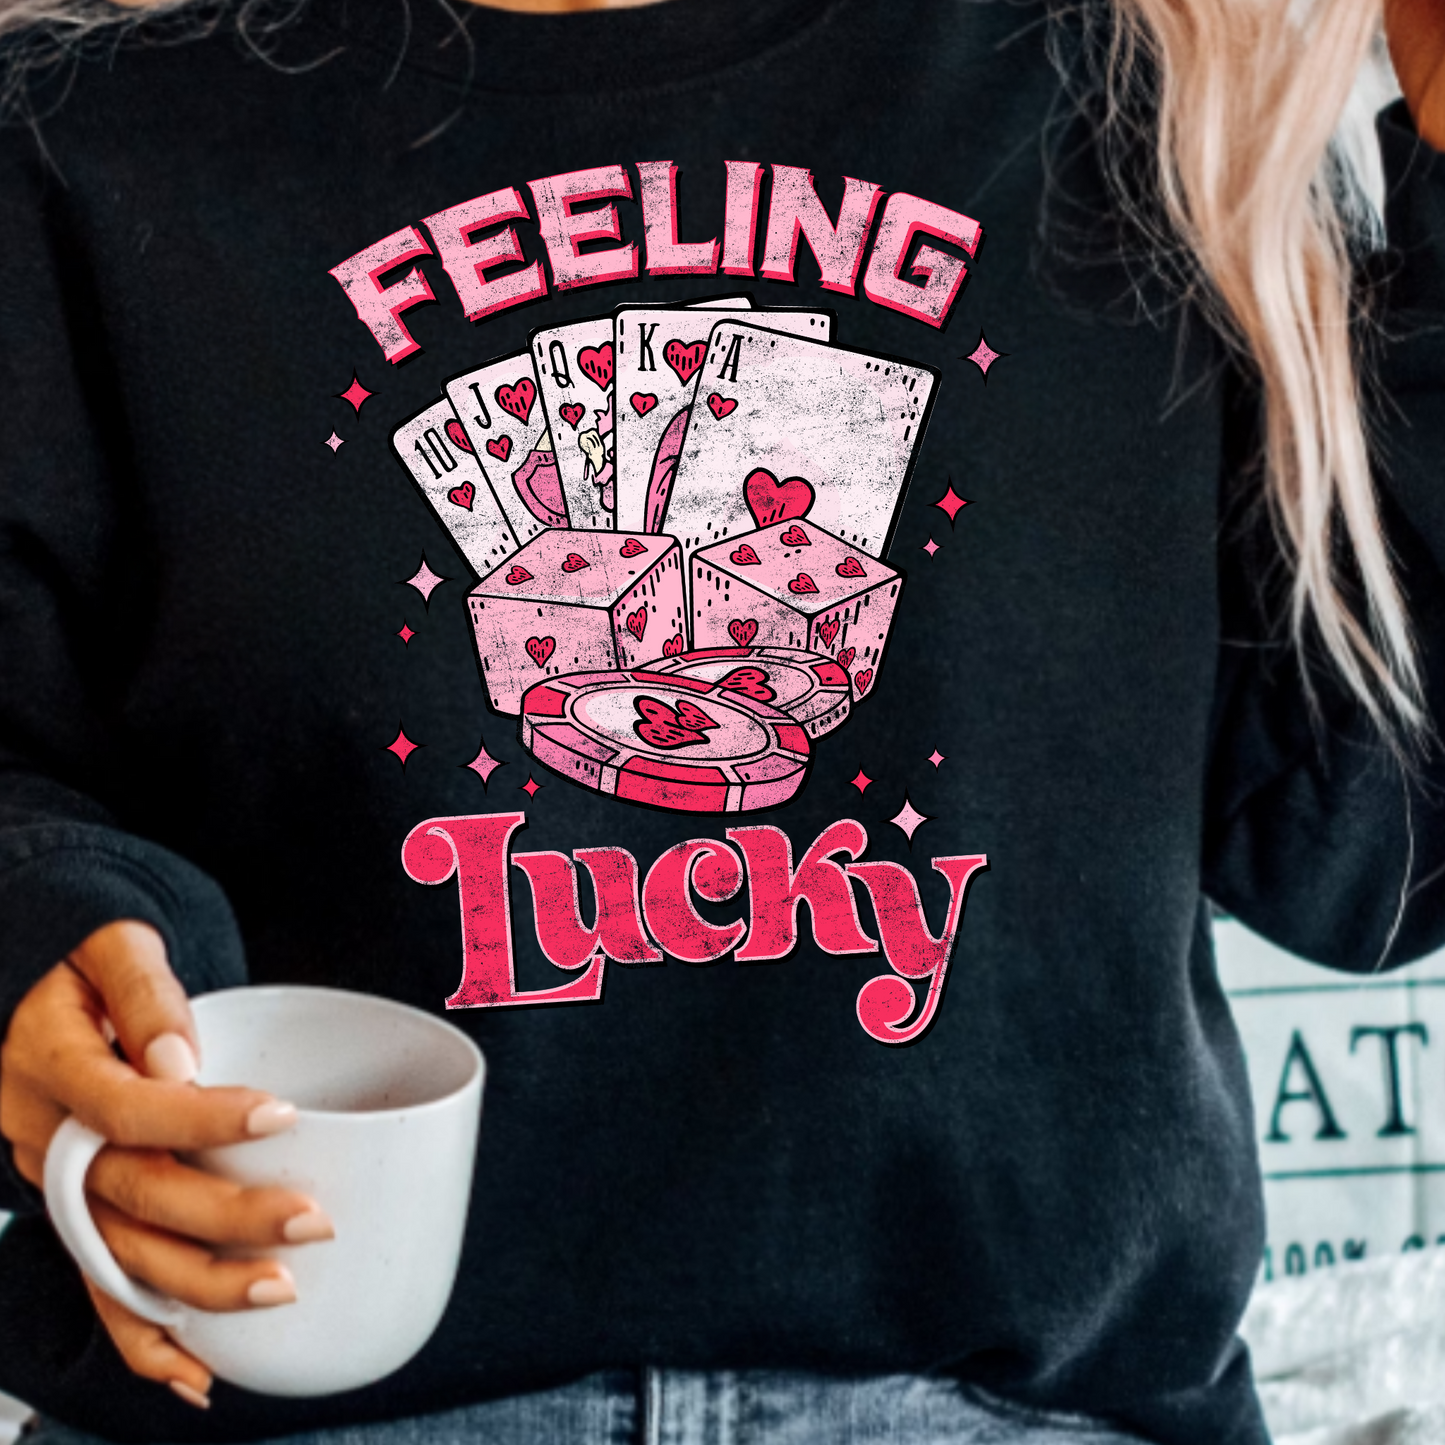 (shirt not included) Feeling Lucky - Clear Film Transfer